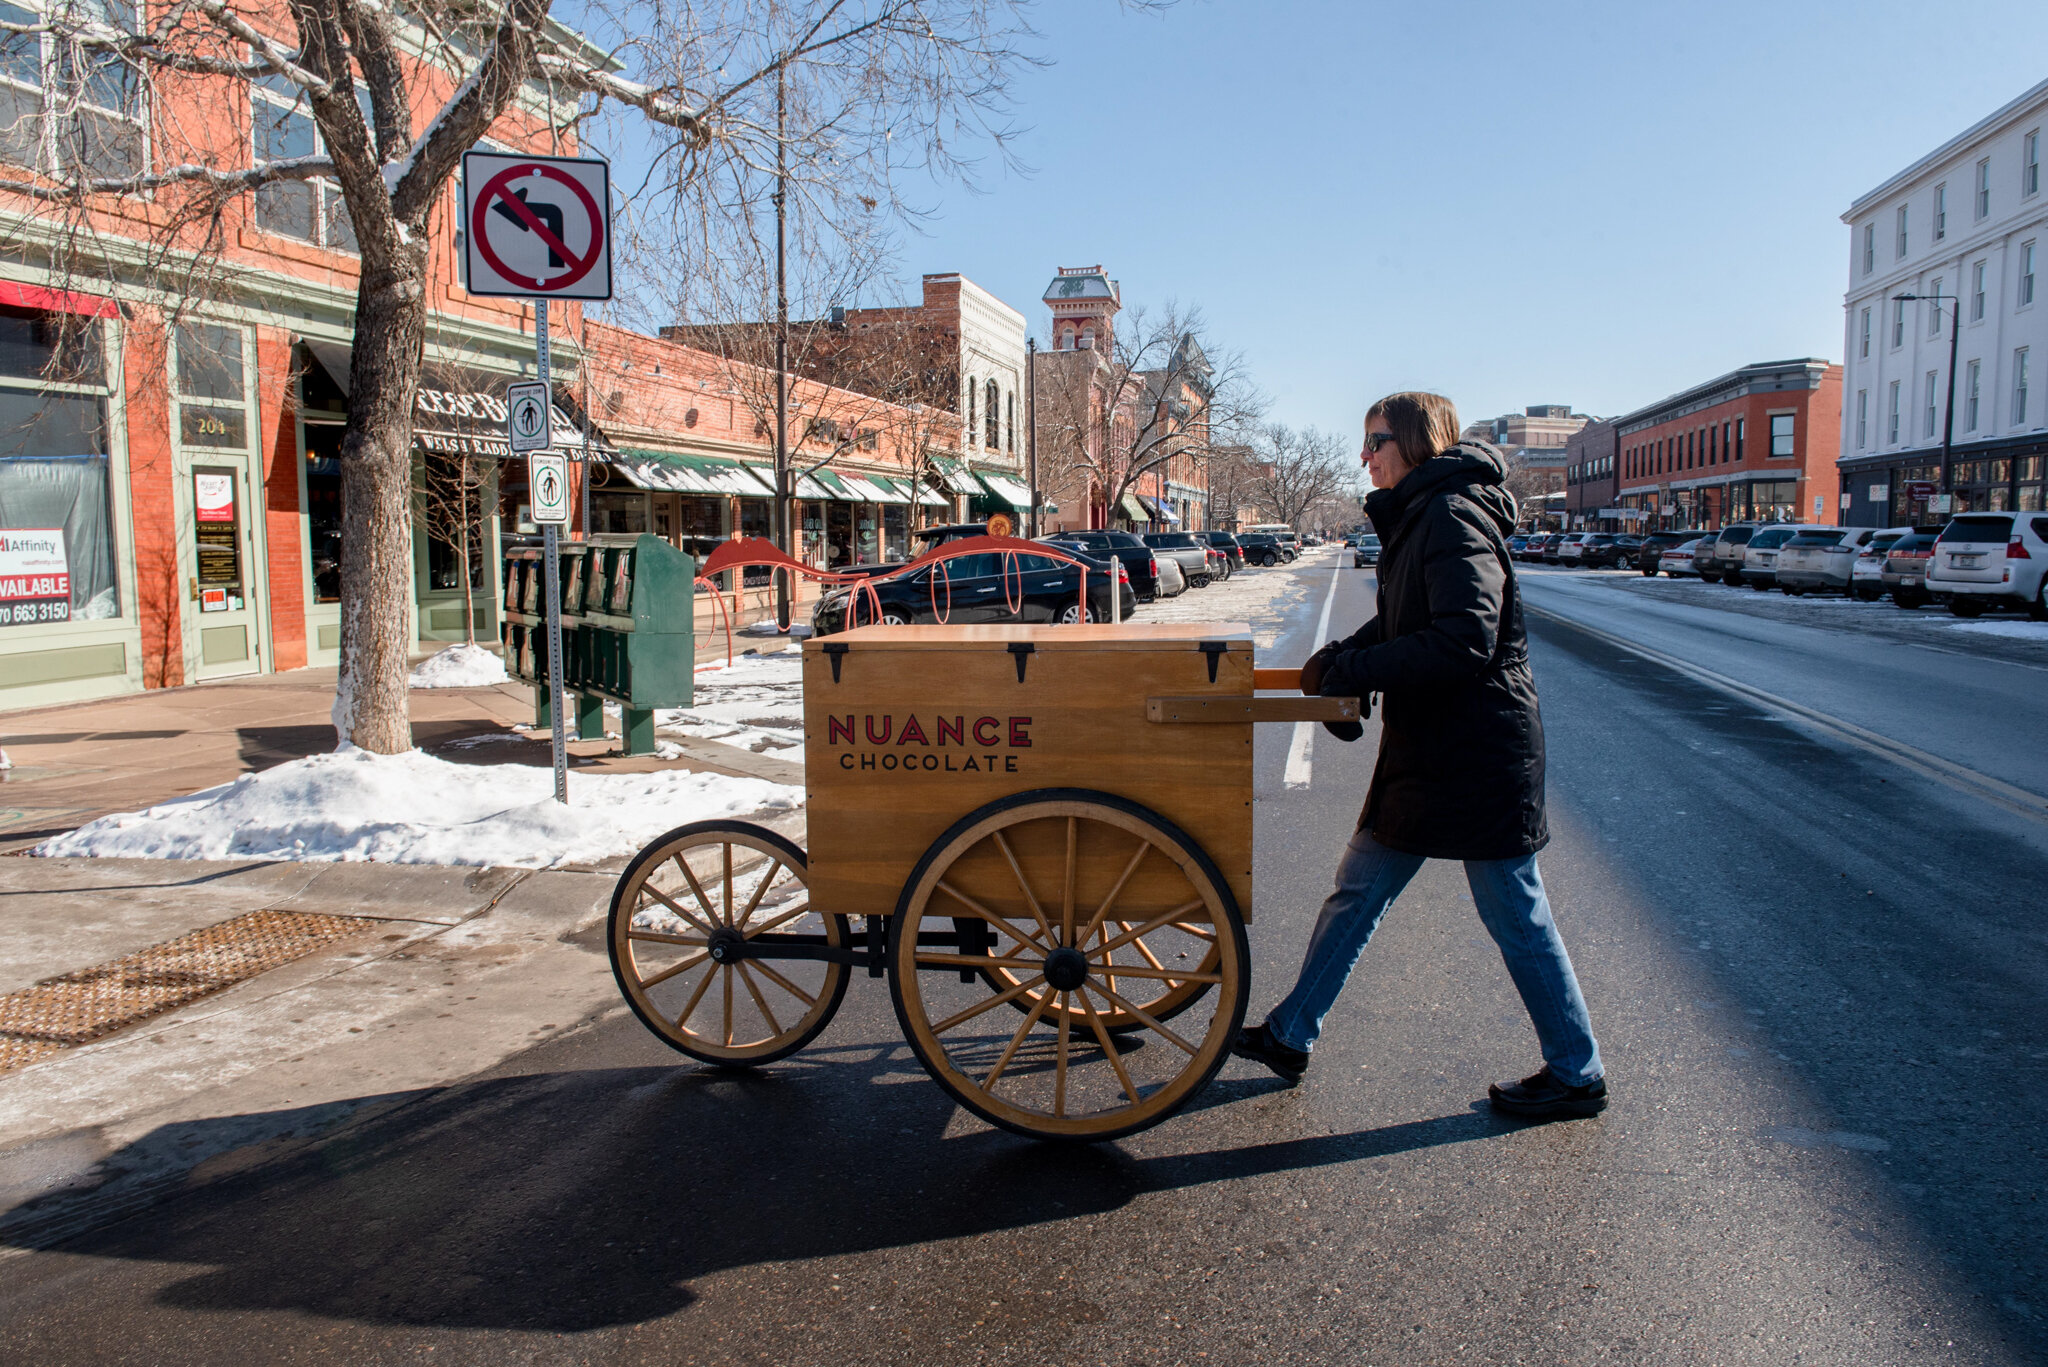  Alix Gadd transports Nuance Chocolate from the small factory to the café in Old Town Fort Collins on Wednesday, February 5, 2020. (Valerie Mosley/Special to the Colorado Sun) 